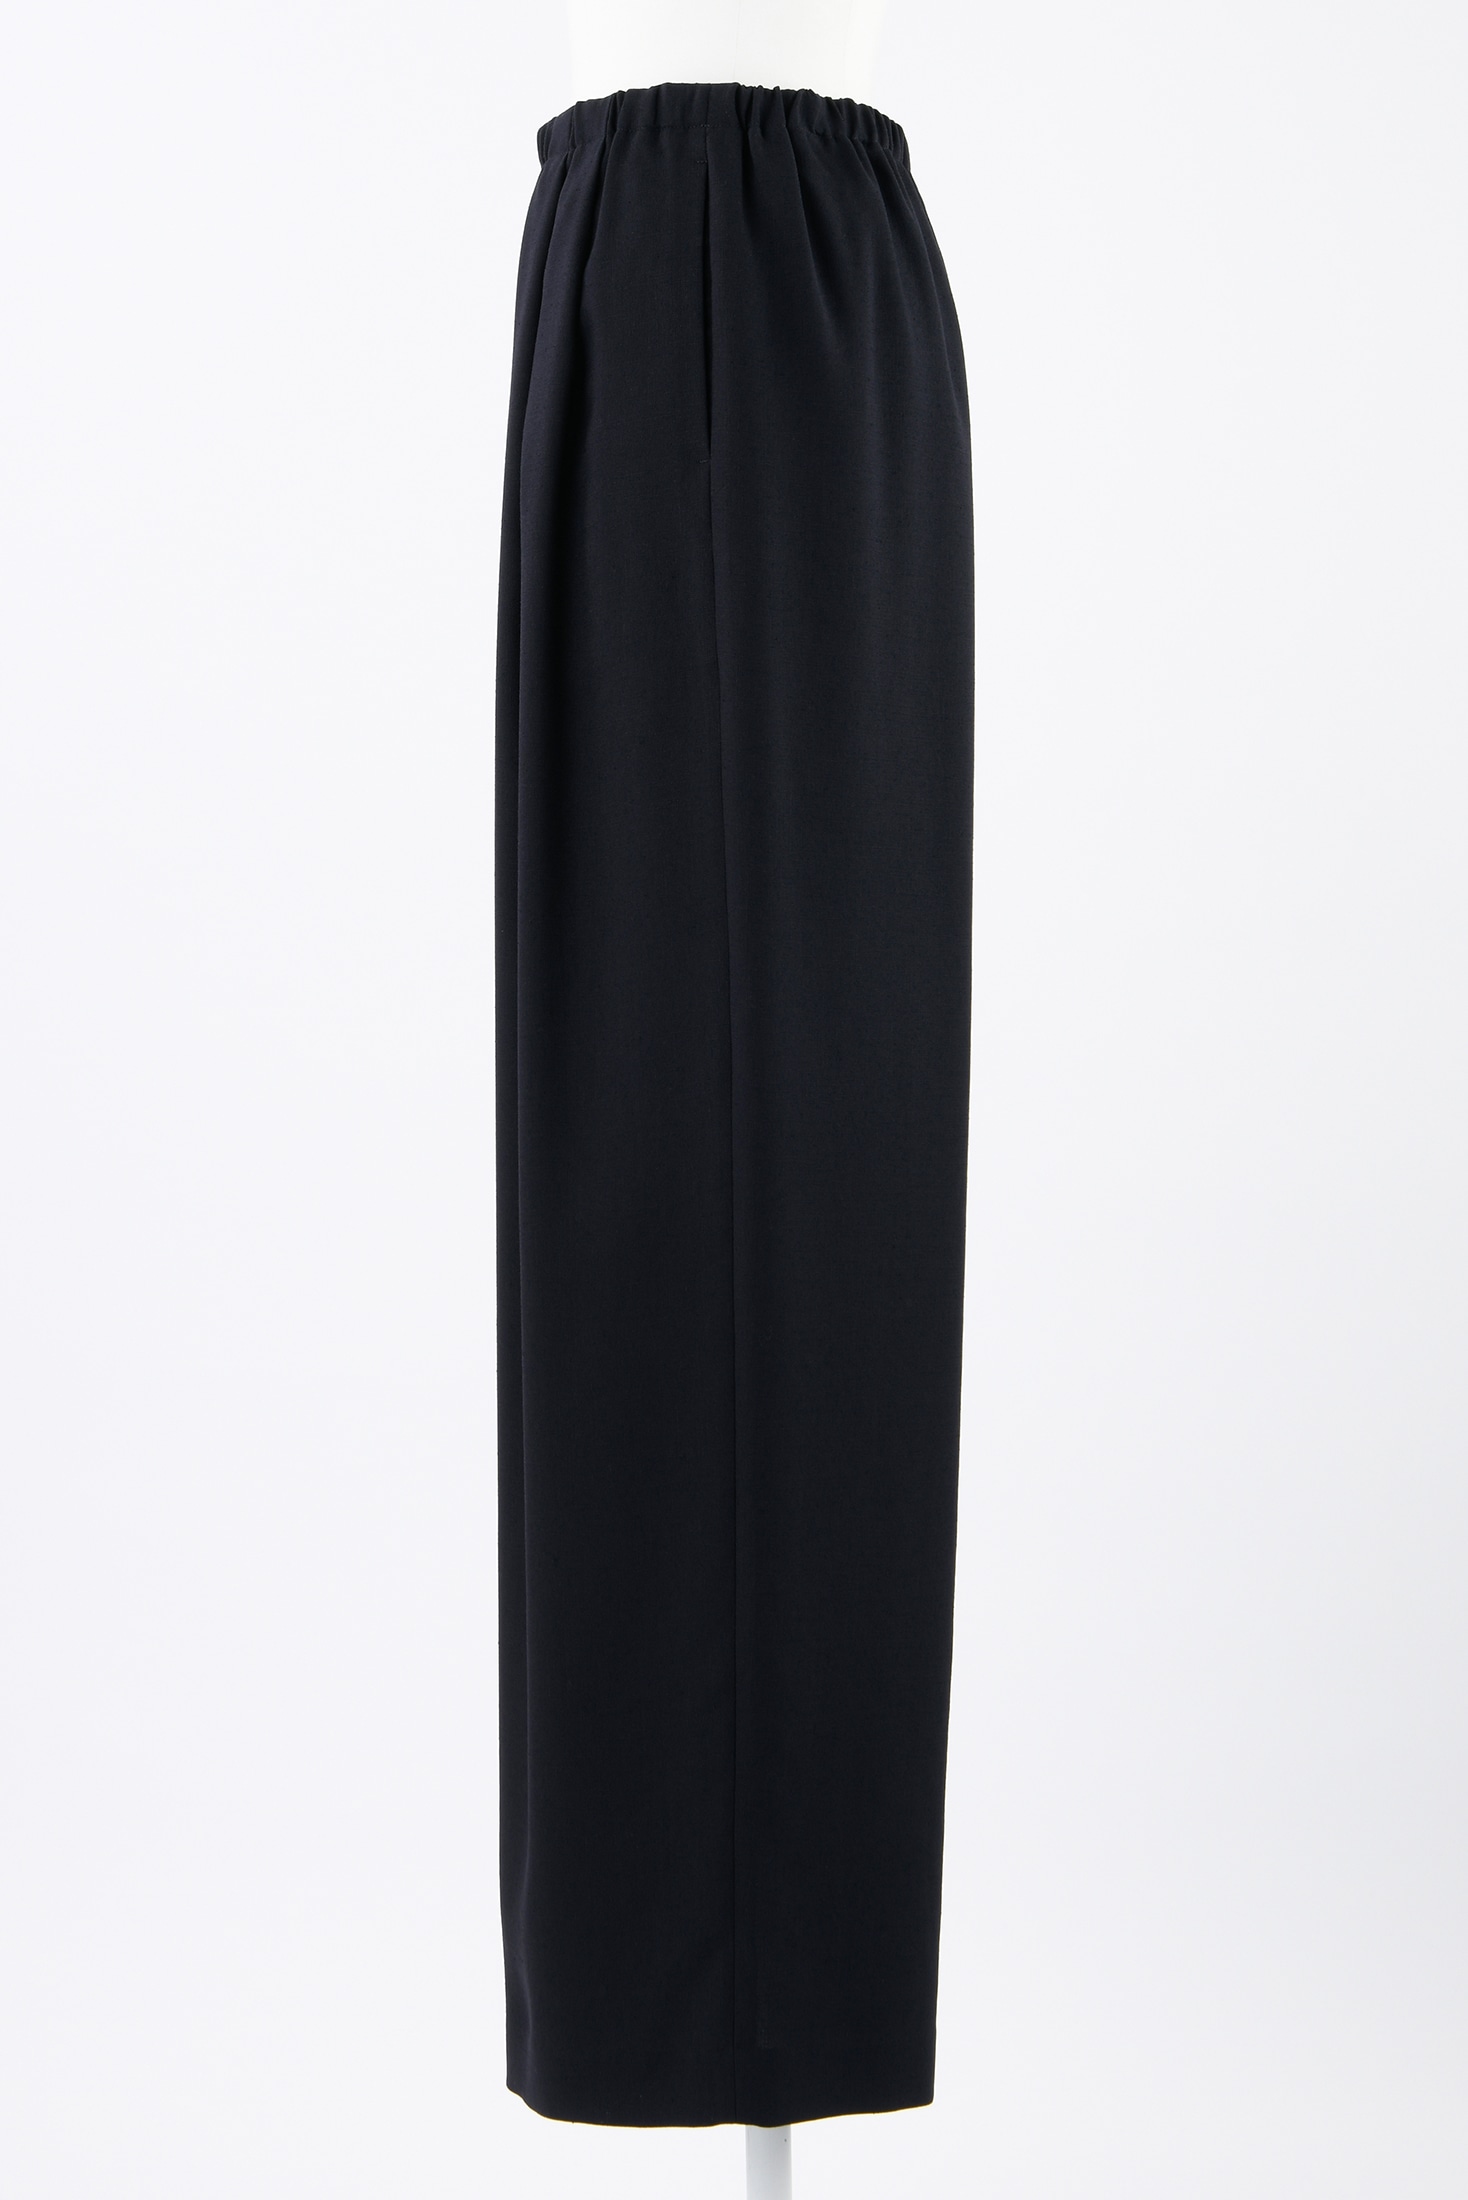 RELAX ELASTIC WIDE-TROUSERS｜34｜BLK｜TROUSERS｜|ENFÖLD OFFICIAL ...